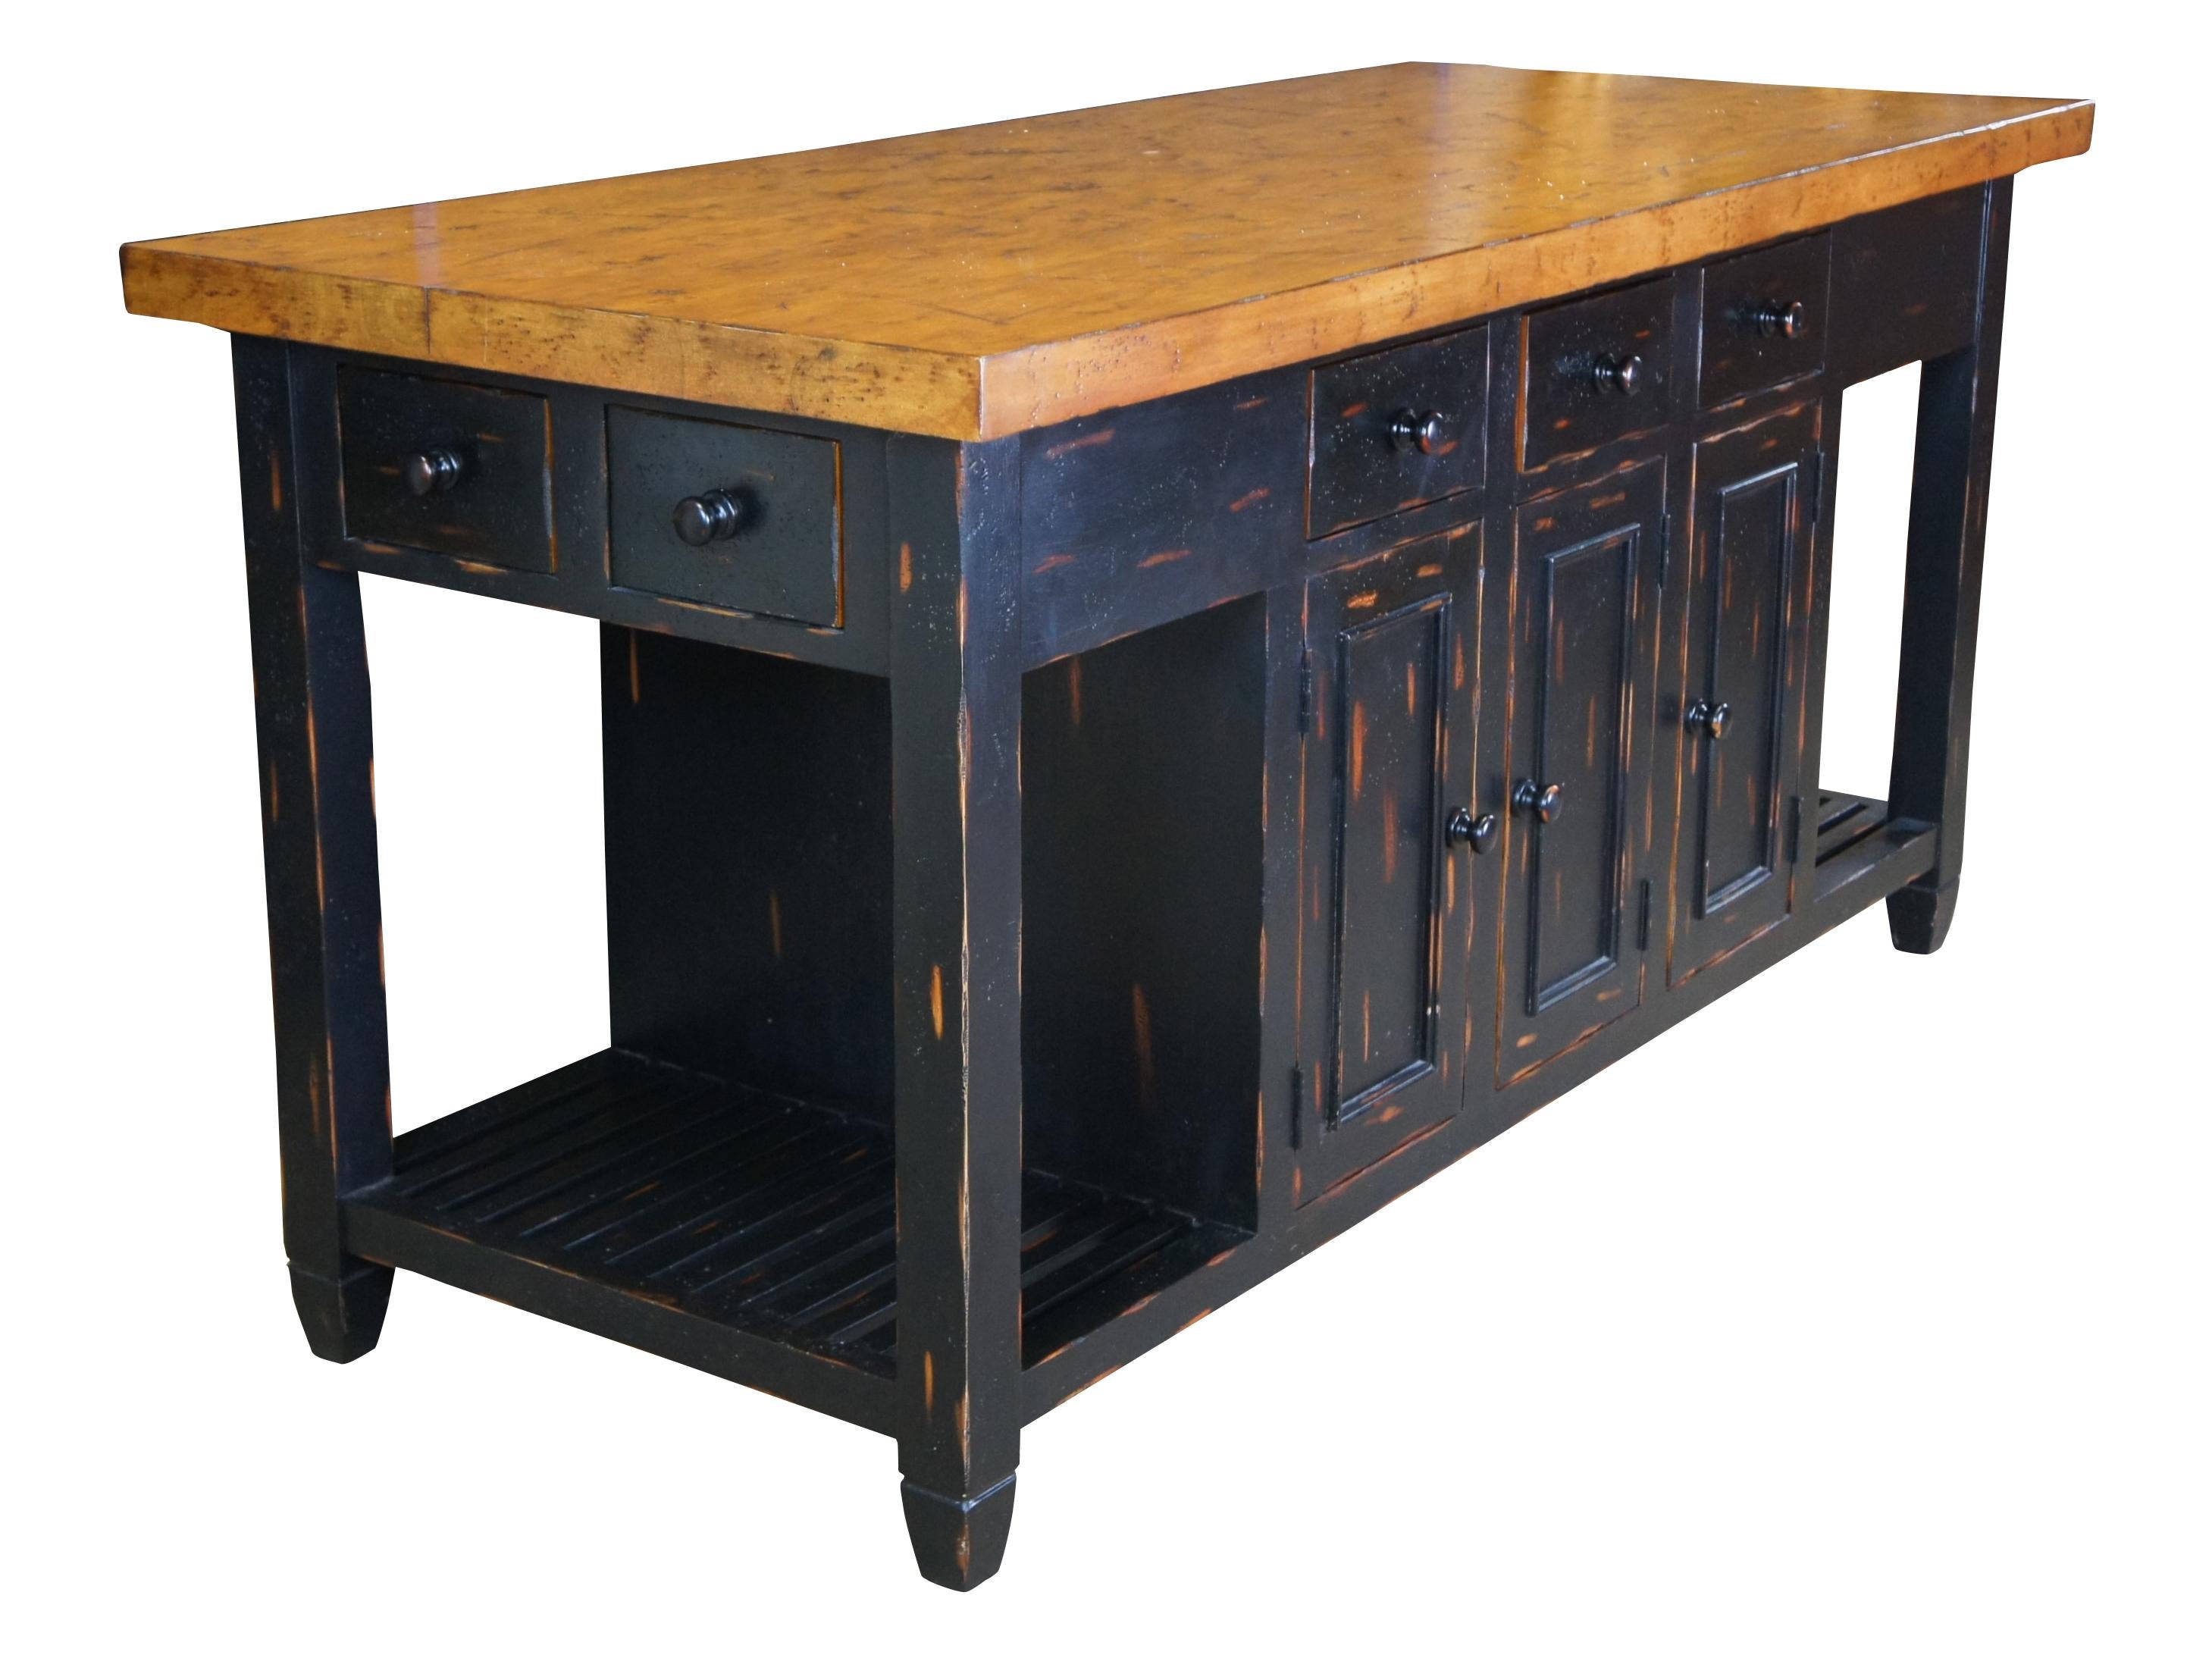 Vintage Sarreid Ltd Farmhouse island / table.  Drawing inspiration from French Country and Farmhouse styling.  Made from pine with natural distressing throughout.  The base or cabinet portion of the table has a dark finish allowing the natural wood